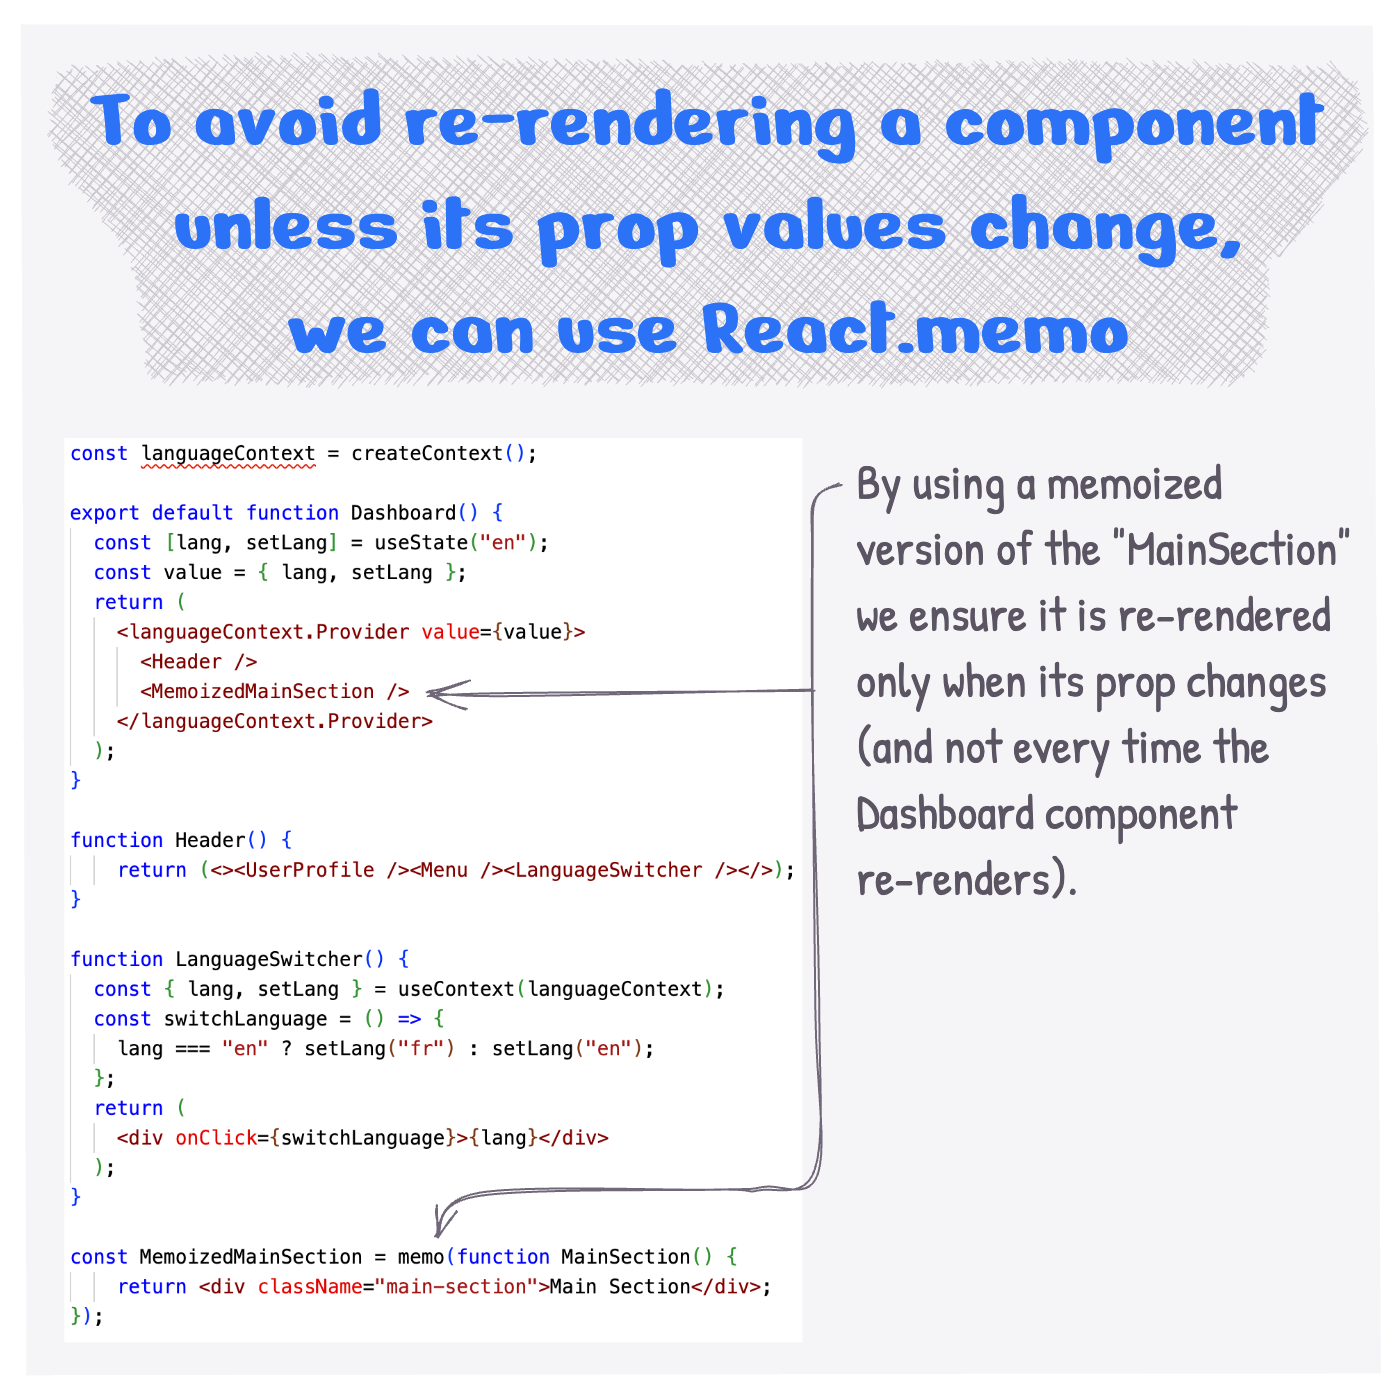 To avoid re-rendering a component unless its prop values change, we can use the React.memo